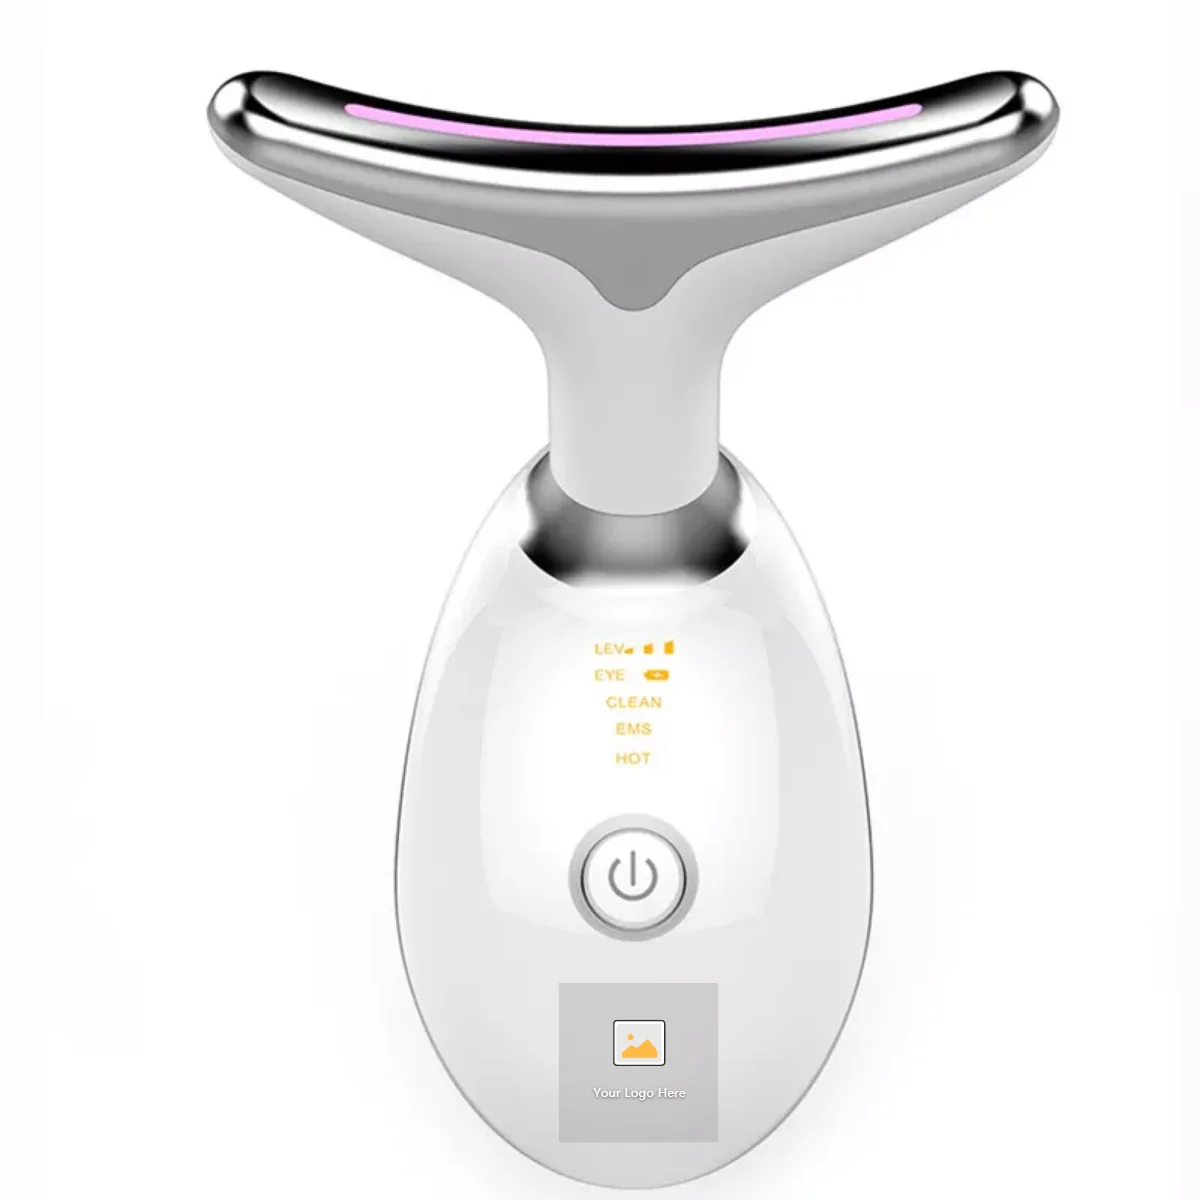 

Neck Face Beauty Device Anti-wrinkle Anti-aging Reduce Puffiness Facial Device 3 Modes Neck Sonic Vibration EMS Neck Lift Device